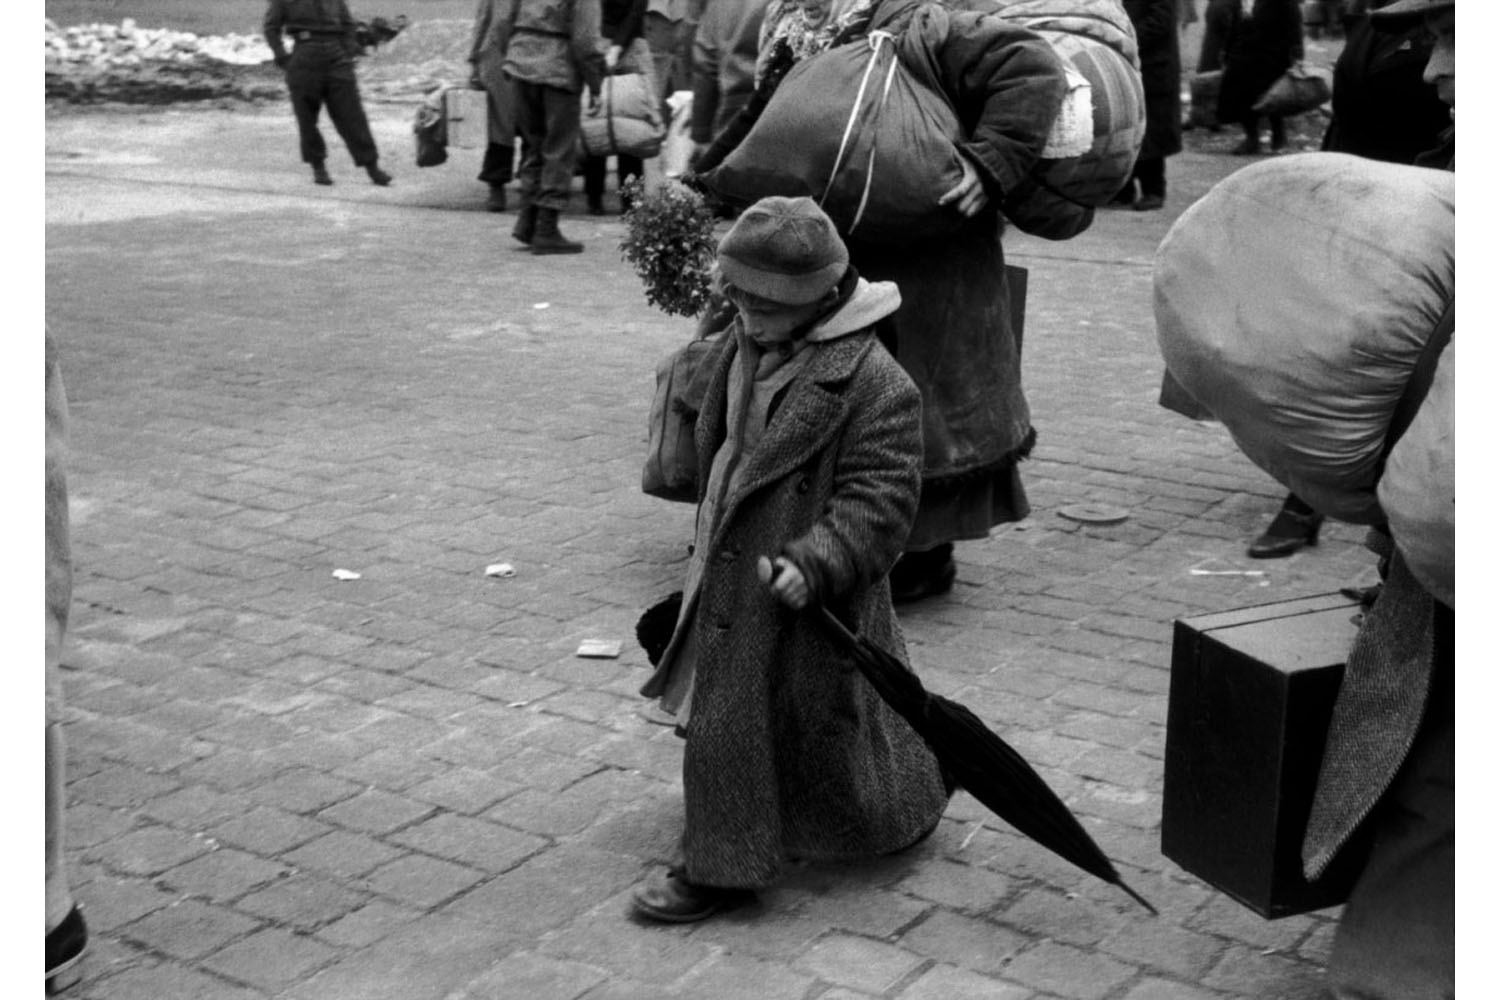 GERMANY. Dessau. A transit camp was located between the American and Soviet zones organised for refugees; political prisoners, POW's, STO's (Forced Labourers), displaced persons, returning from the Eastern front of Germany that had been liberated by the Soviet Army. A Soviet child who was deported with his parents, returning to his homeland. April 1945.